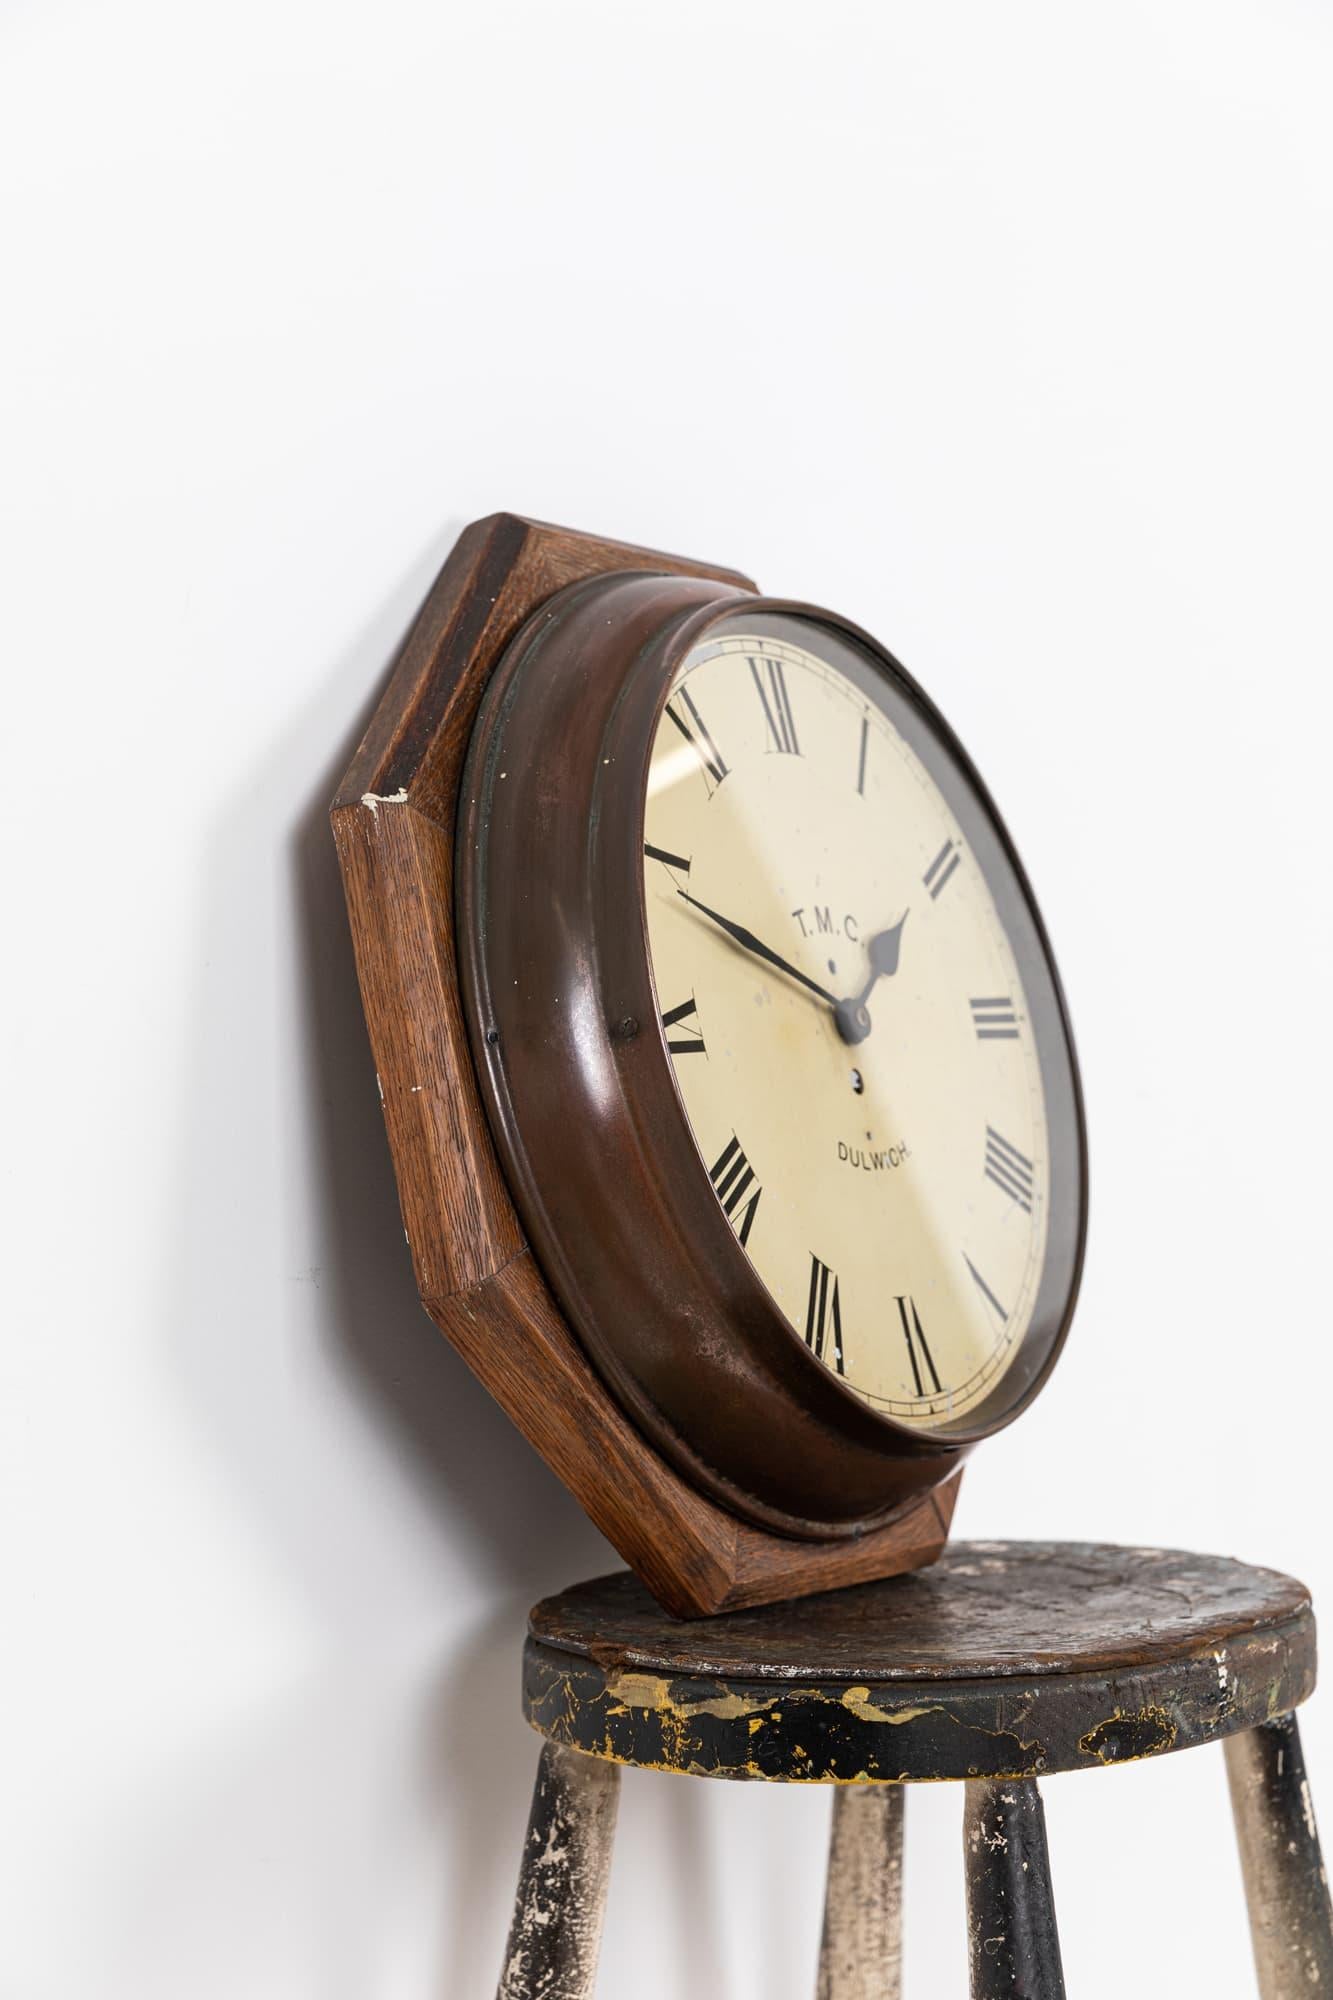 English Vintage Antique Industrial Wooden& Copper T.M.C Wall Clock, c 1930